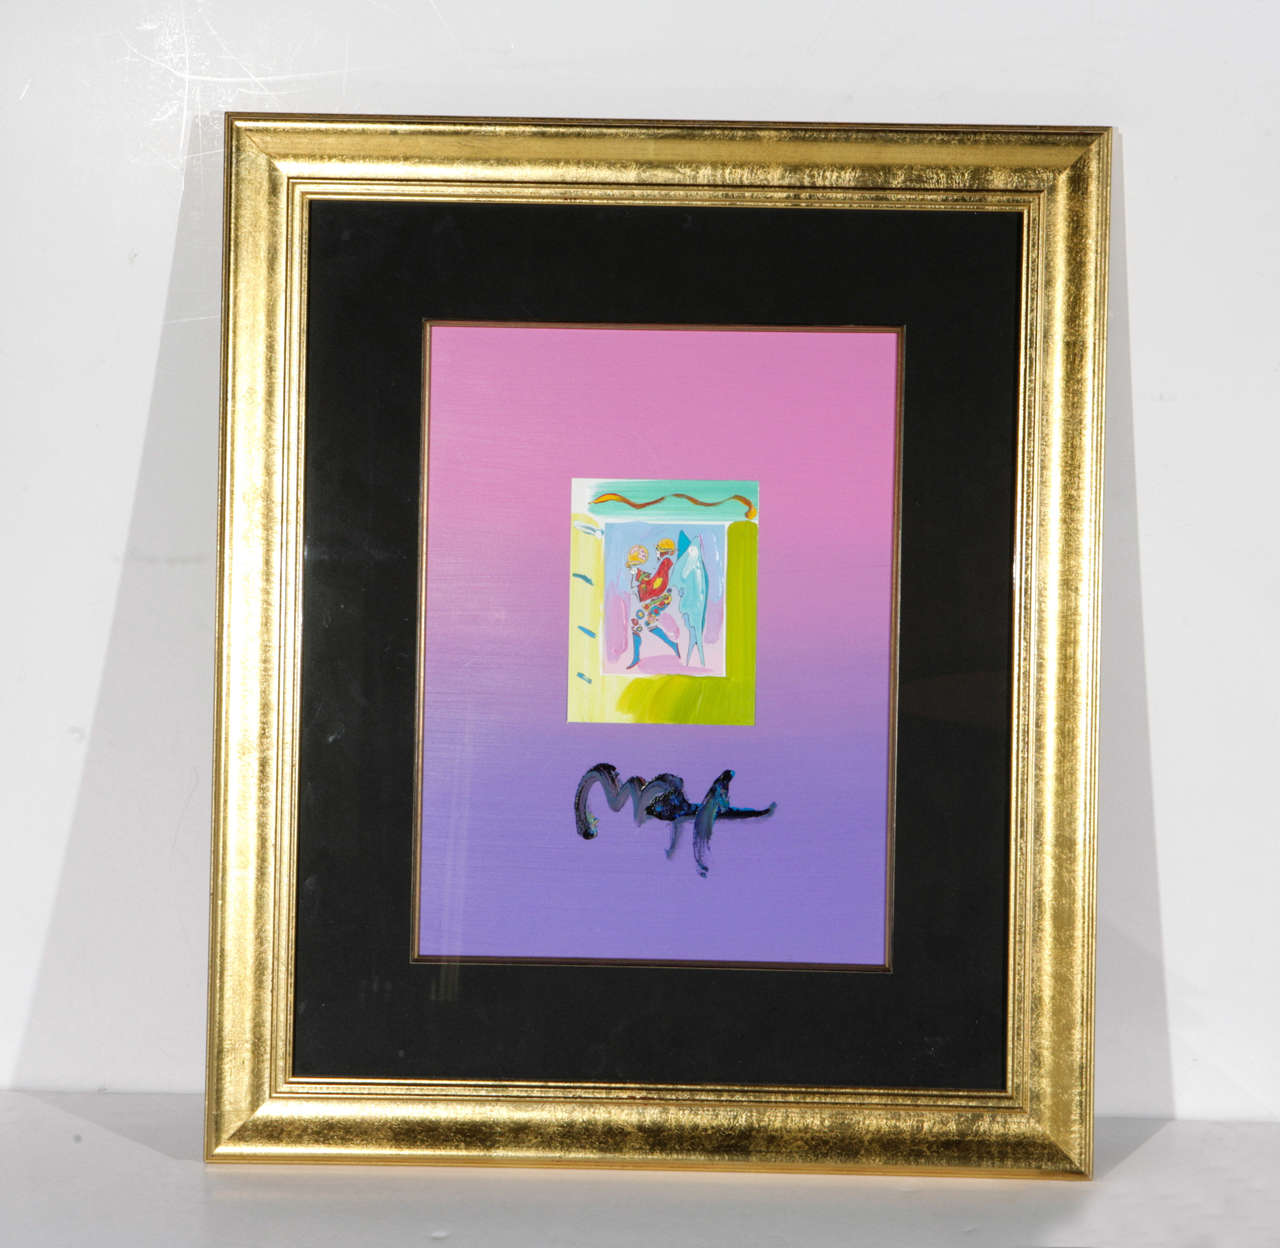 Peter Max framed artwork. Mixed-media, the drawing in the center is in pen then painted over in oil paint. The gradient background, as well as Peter Max's signature is in oil paint. There is a stamp on the bottom left corner of the inner drawing